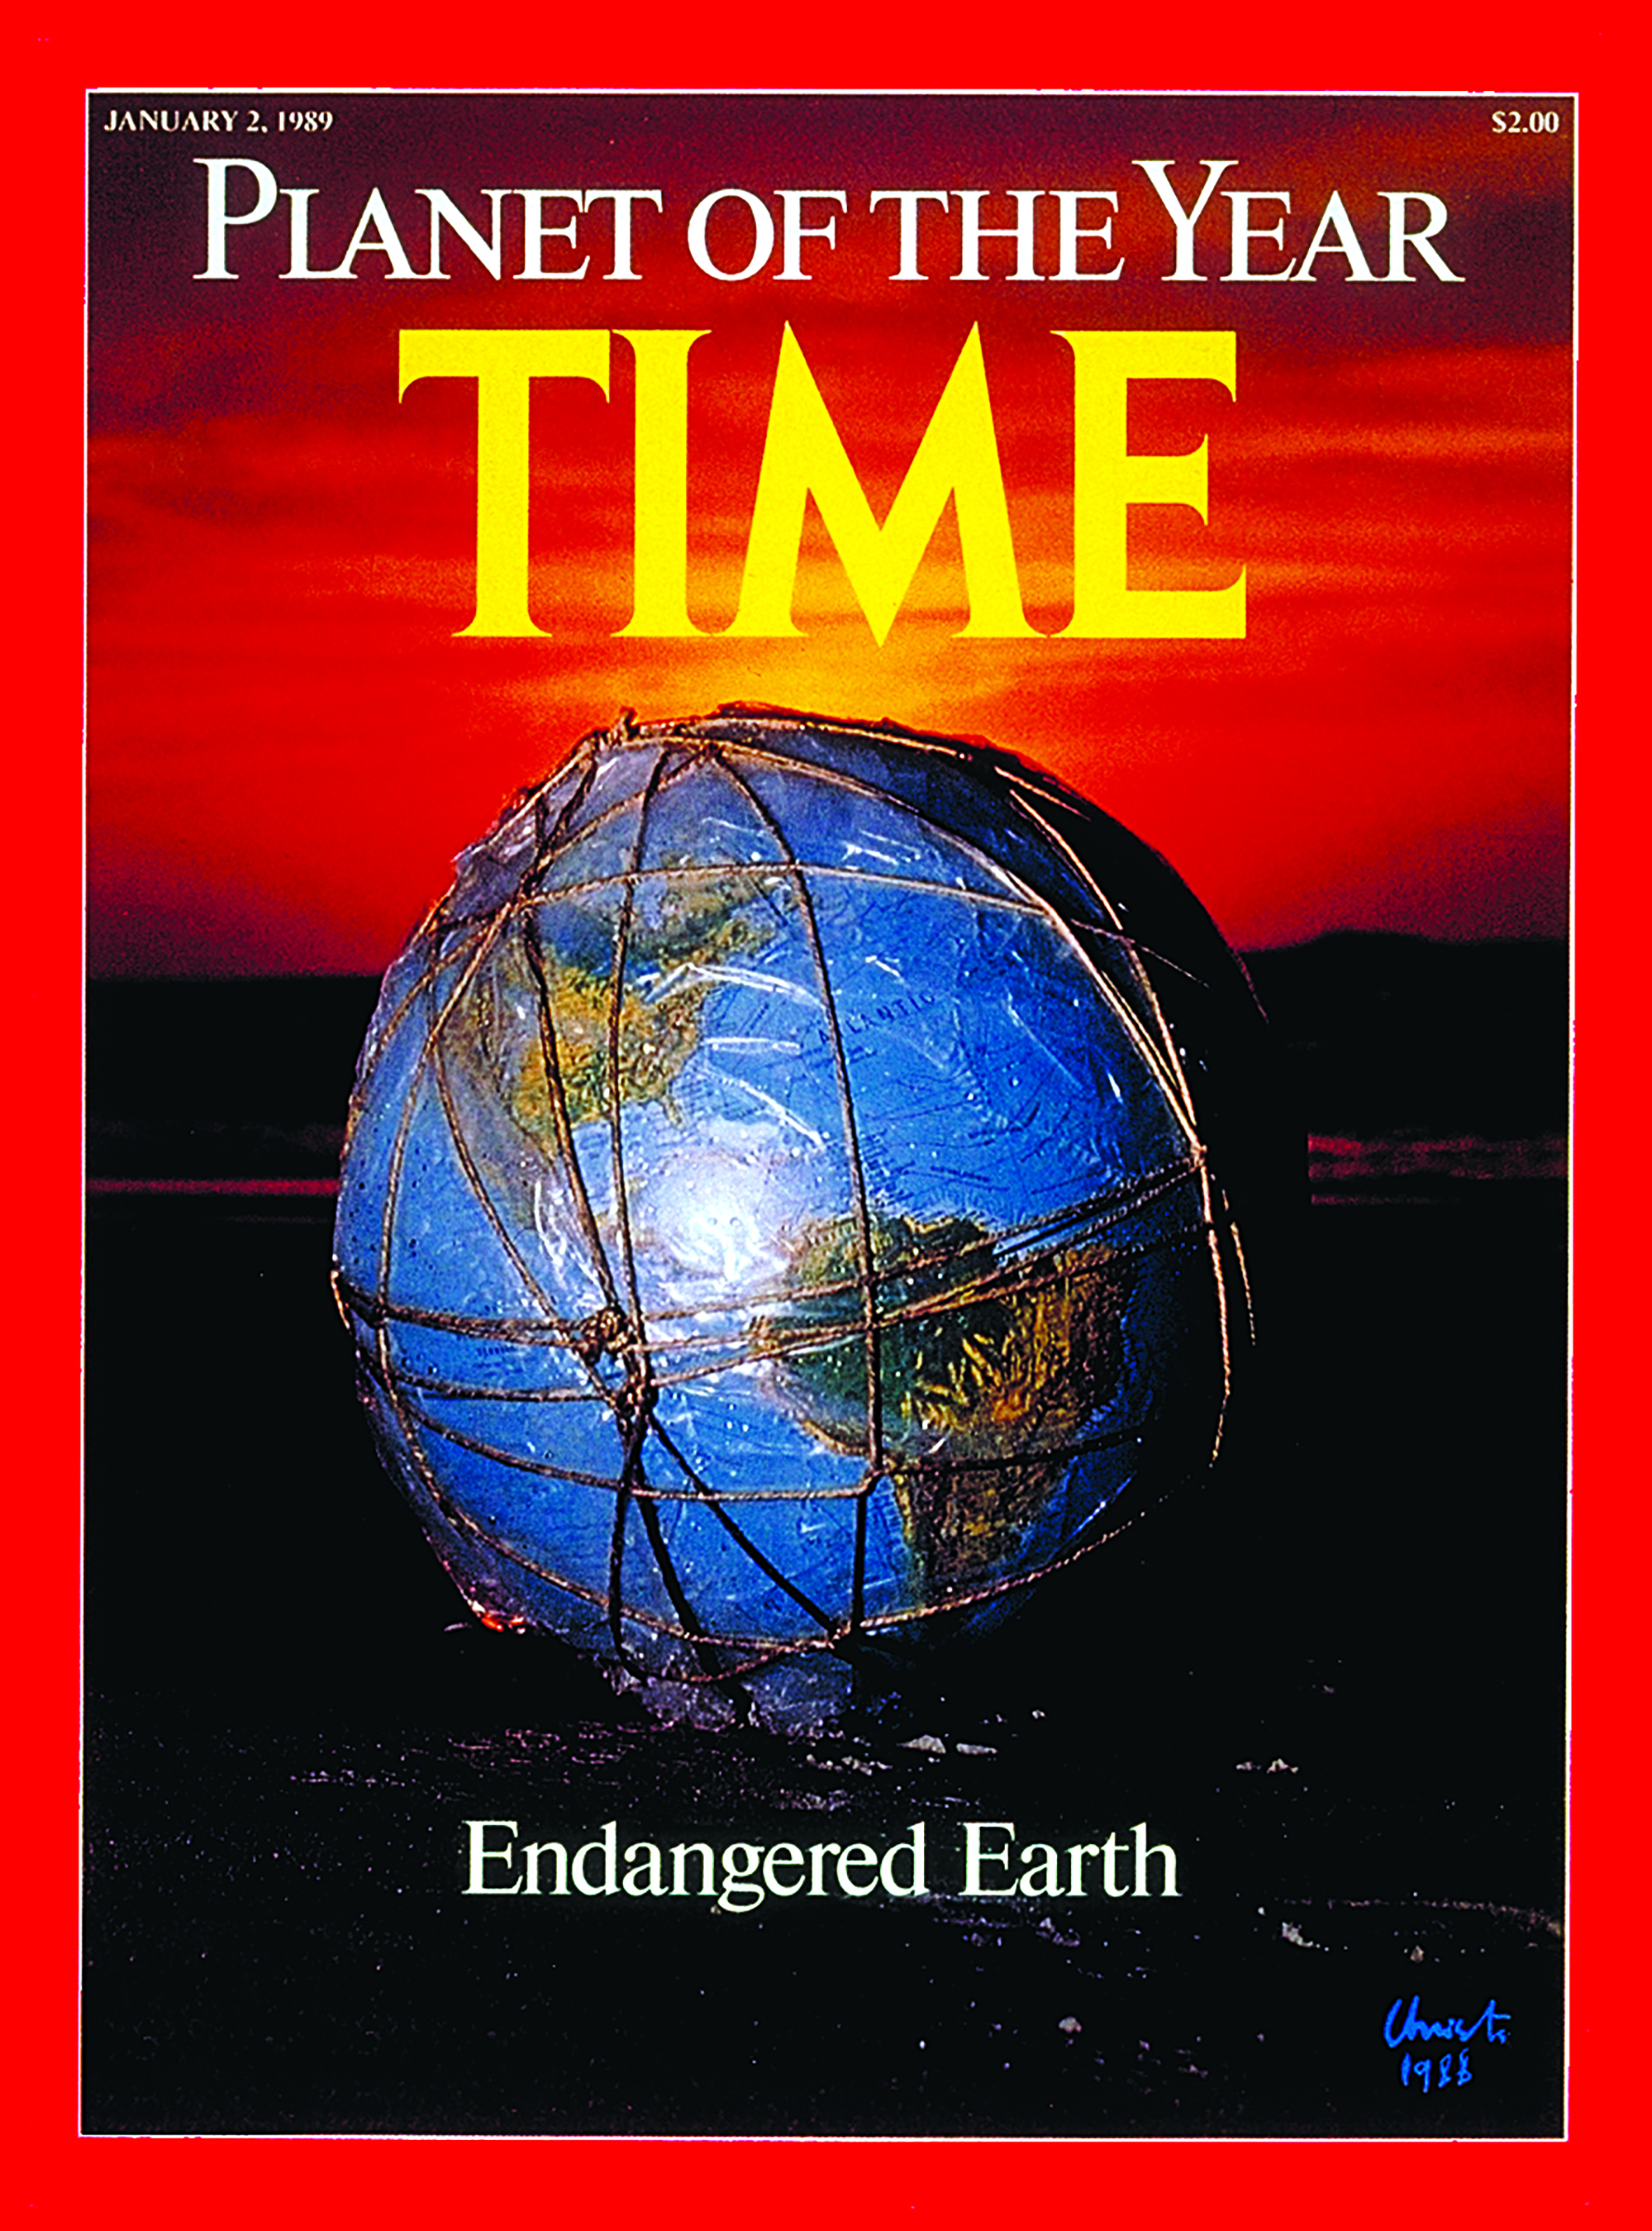 Endangered Earth, Planet of the Year, Jan. 2, 1989 cover